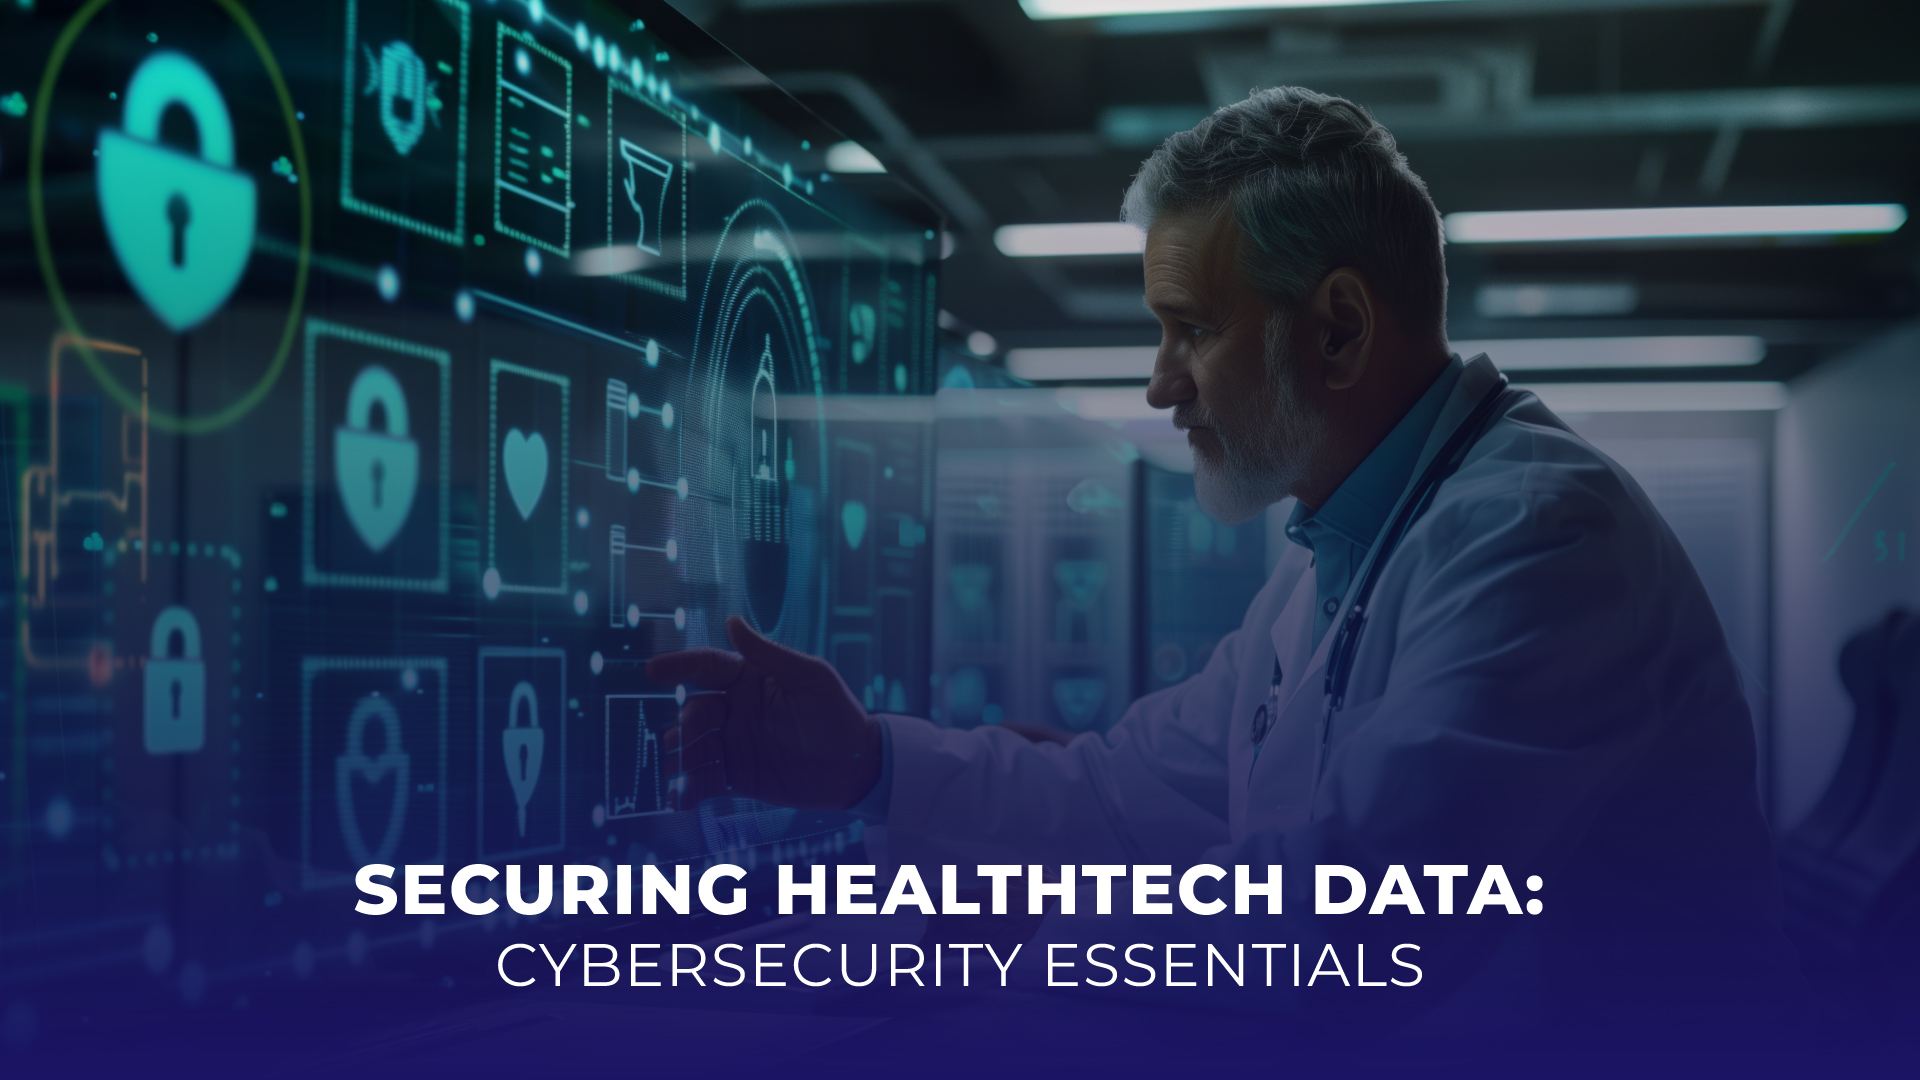 Securing HealthTech Data: Cybersecurity Essentials